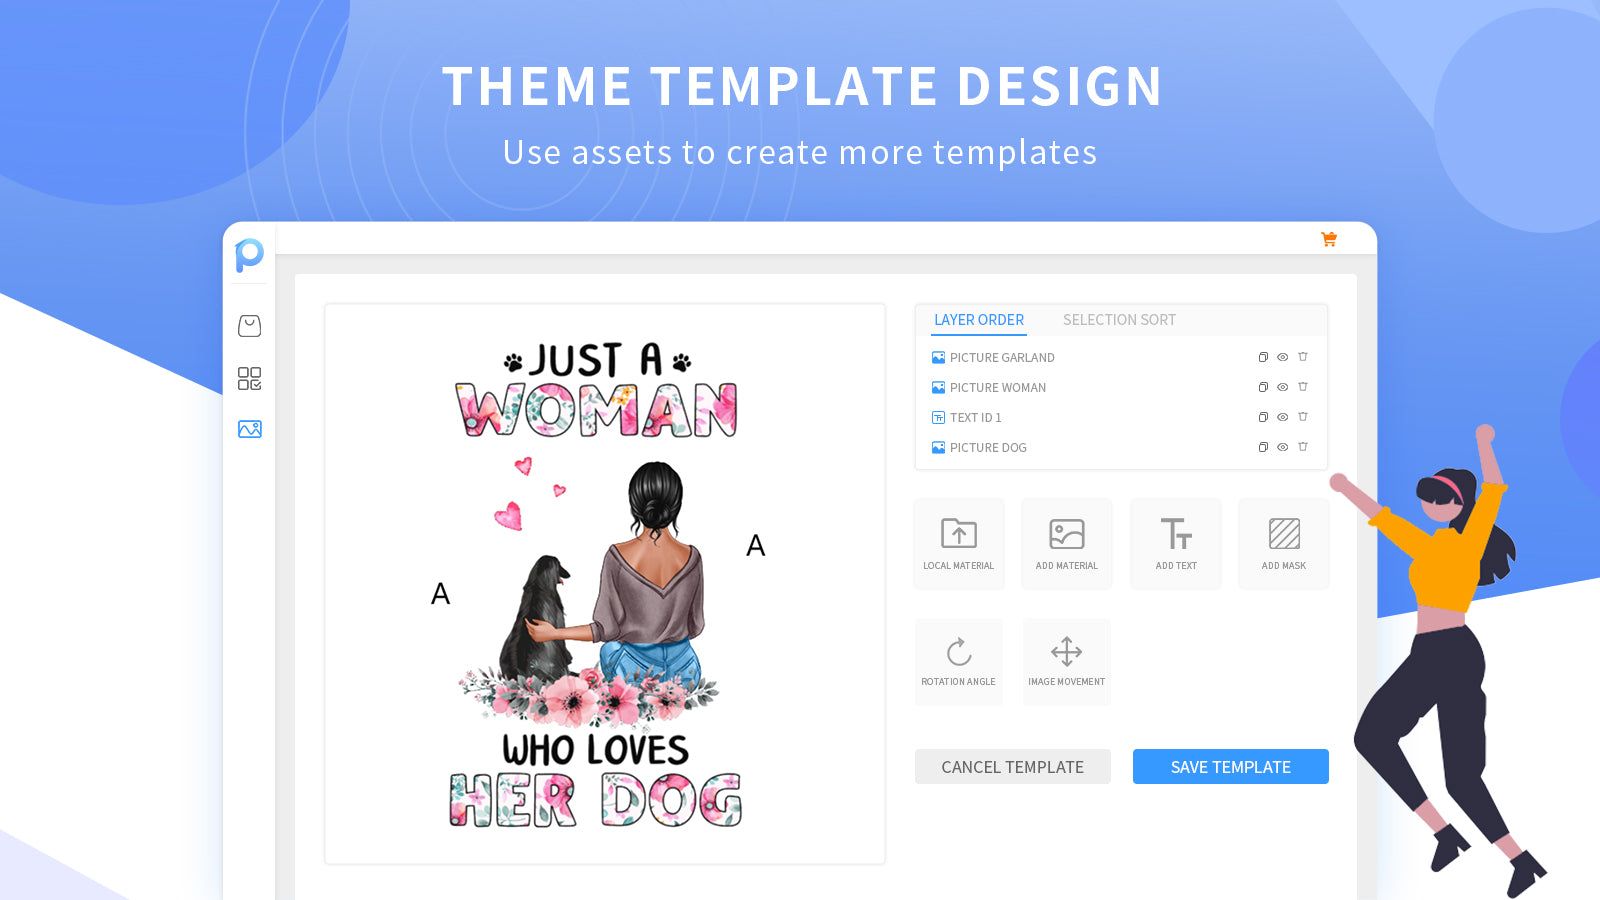 The user designs the theme template interface on the platform